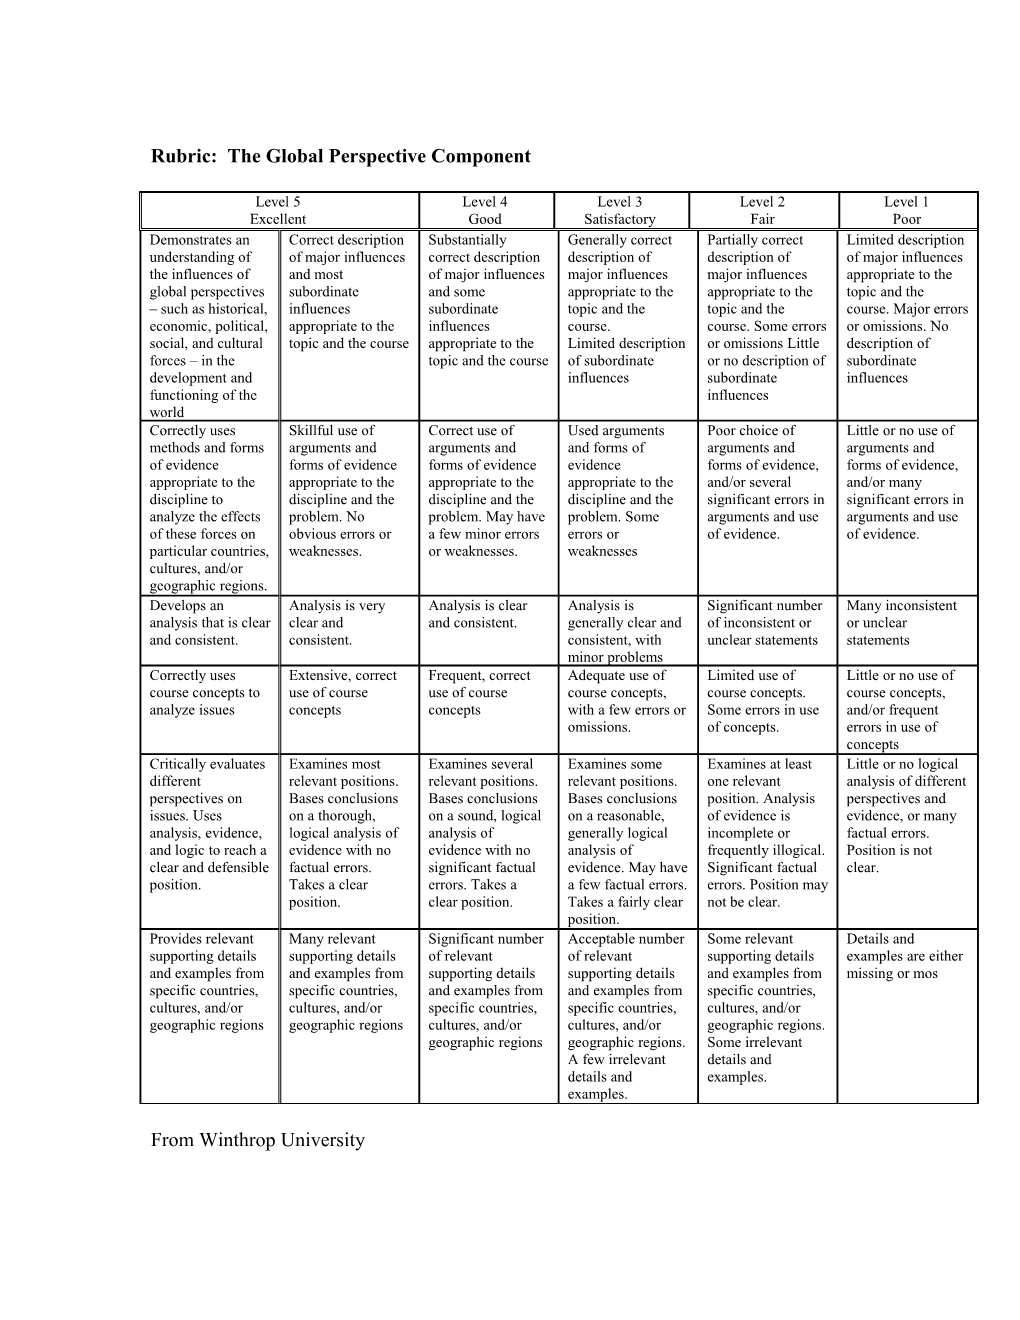 Rubric: the Global Perspective Component